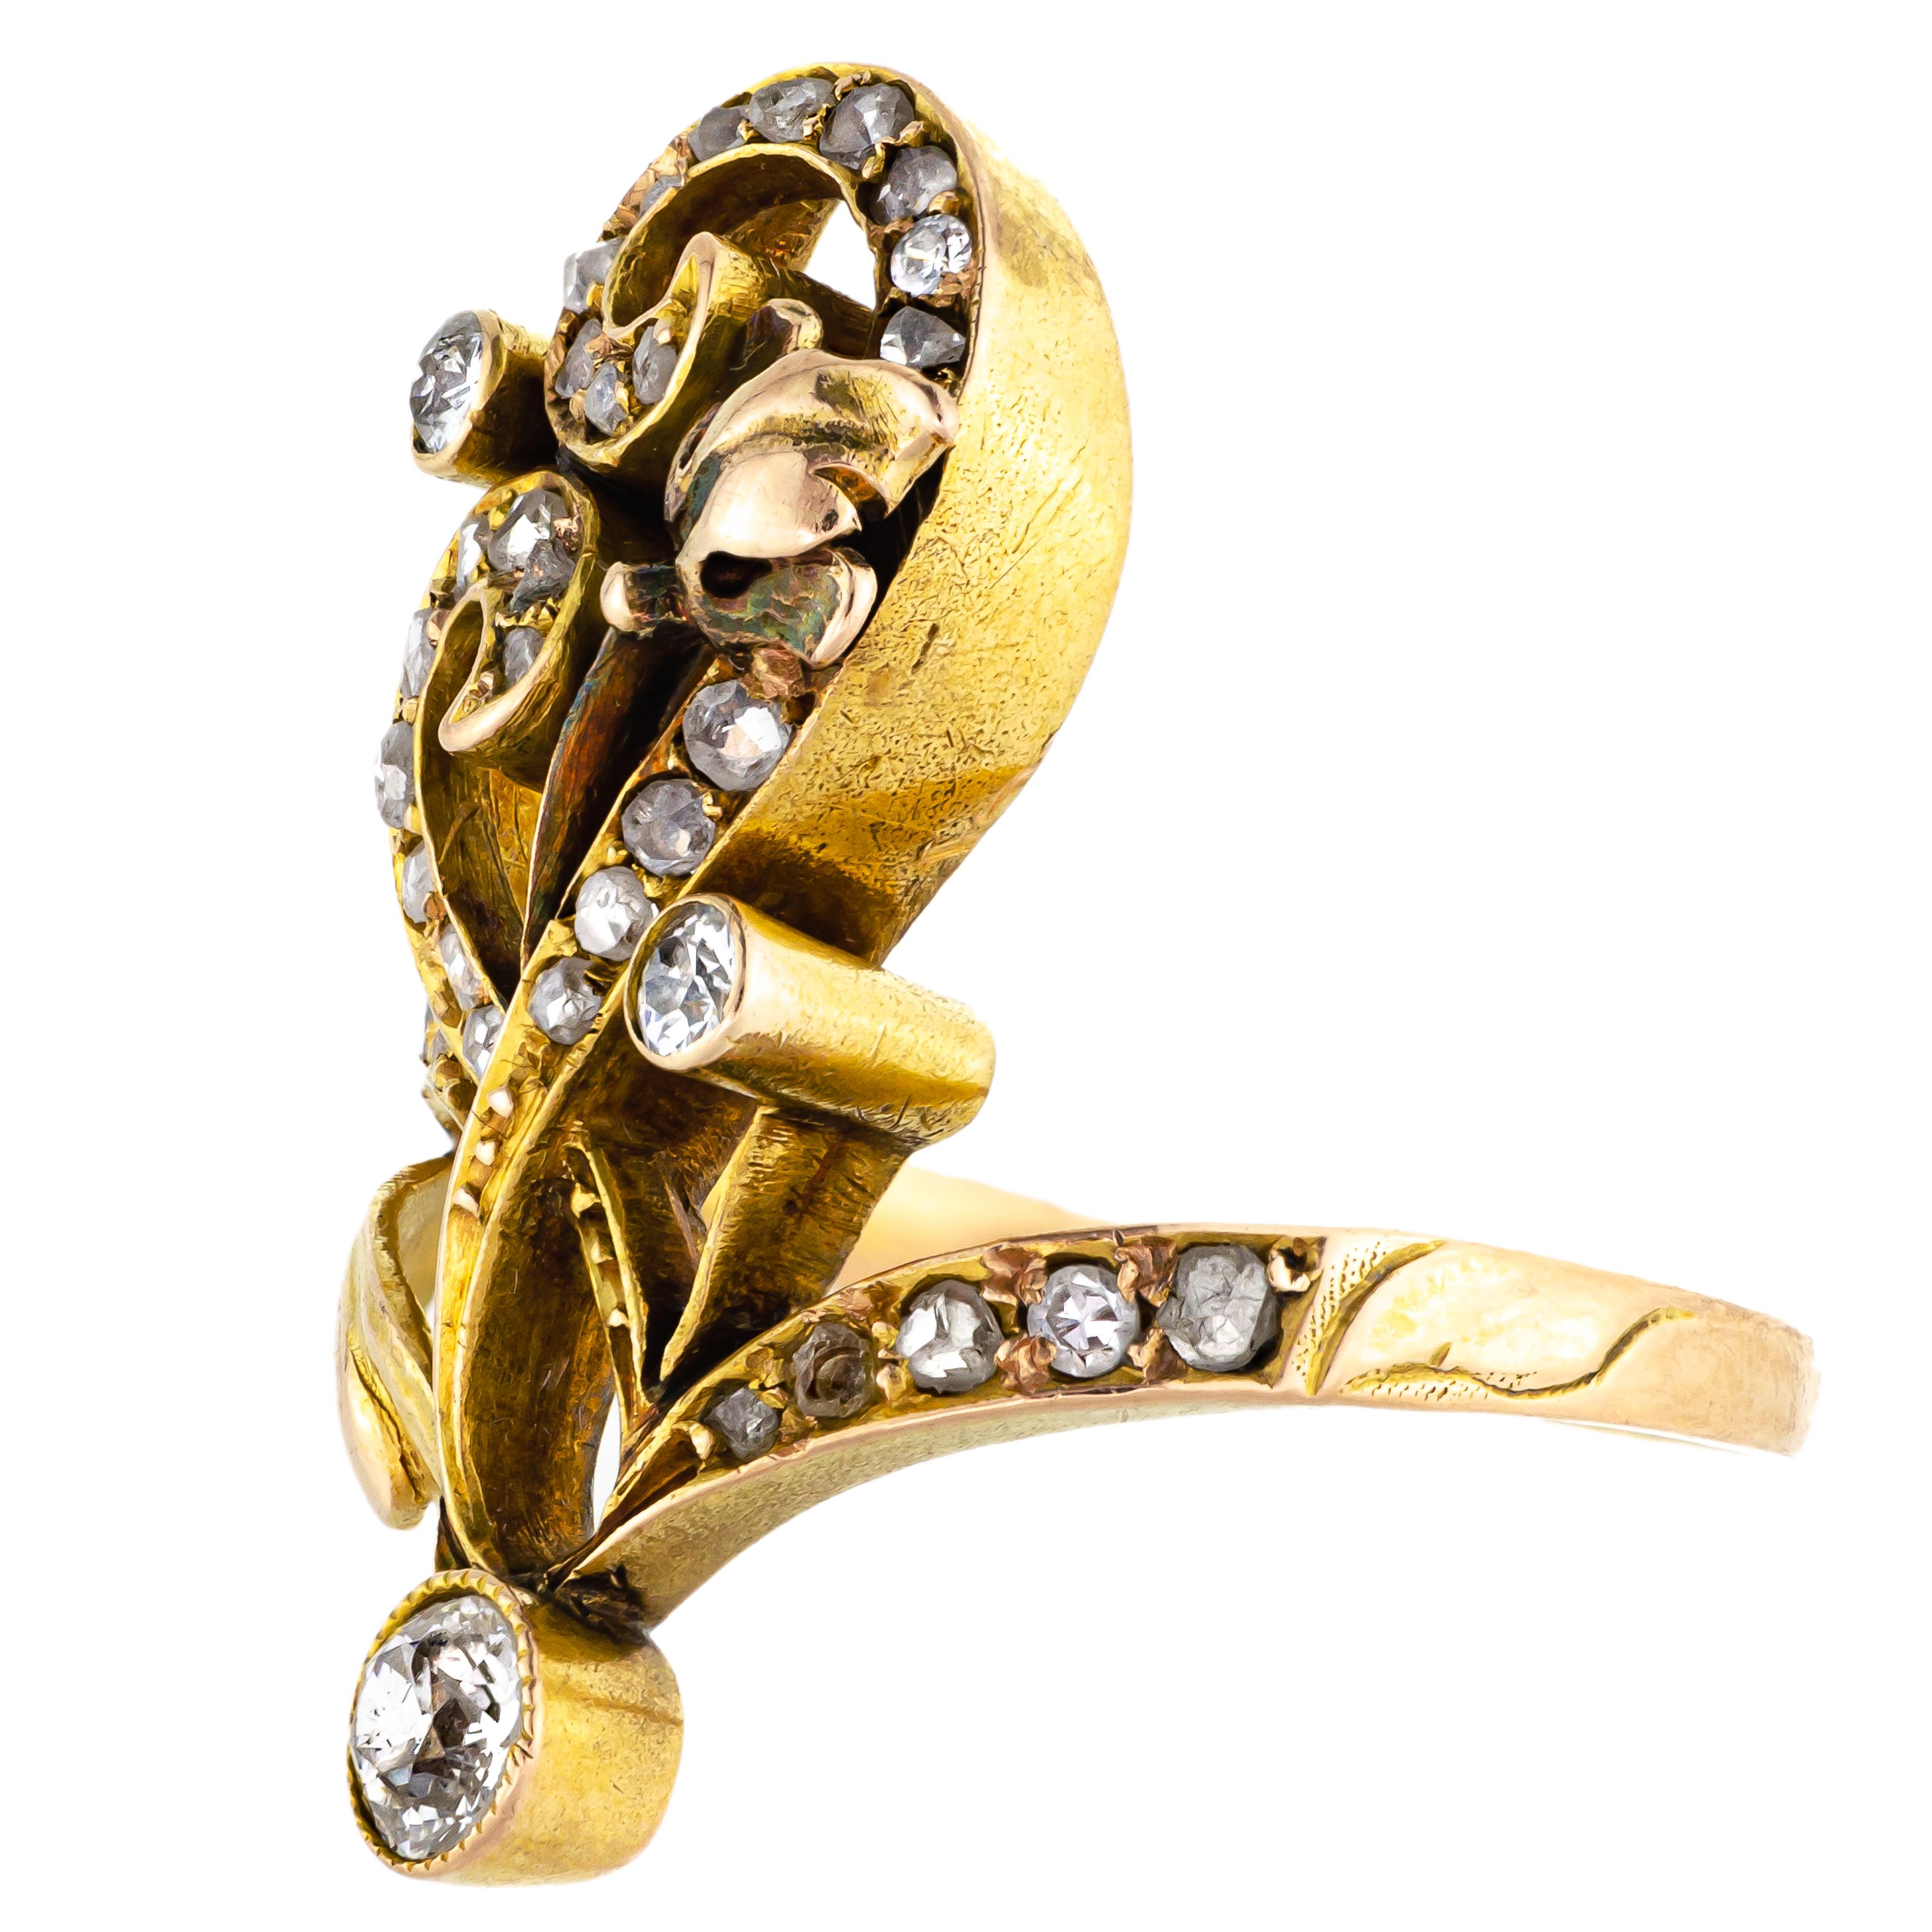 This elegant Circa 1900 Art Nouveau diamond and 18kt yellow gold long ring is a lovely example of the beautiful flow of the Art Nouveau movement. With a feminine stylized flower swirl design rendered in 18kt (tested) yellow gold and set with